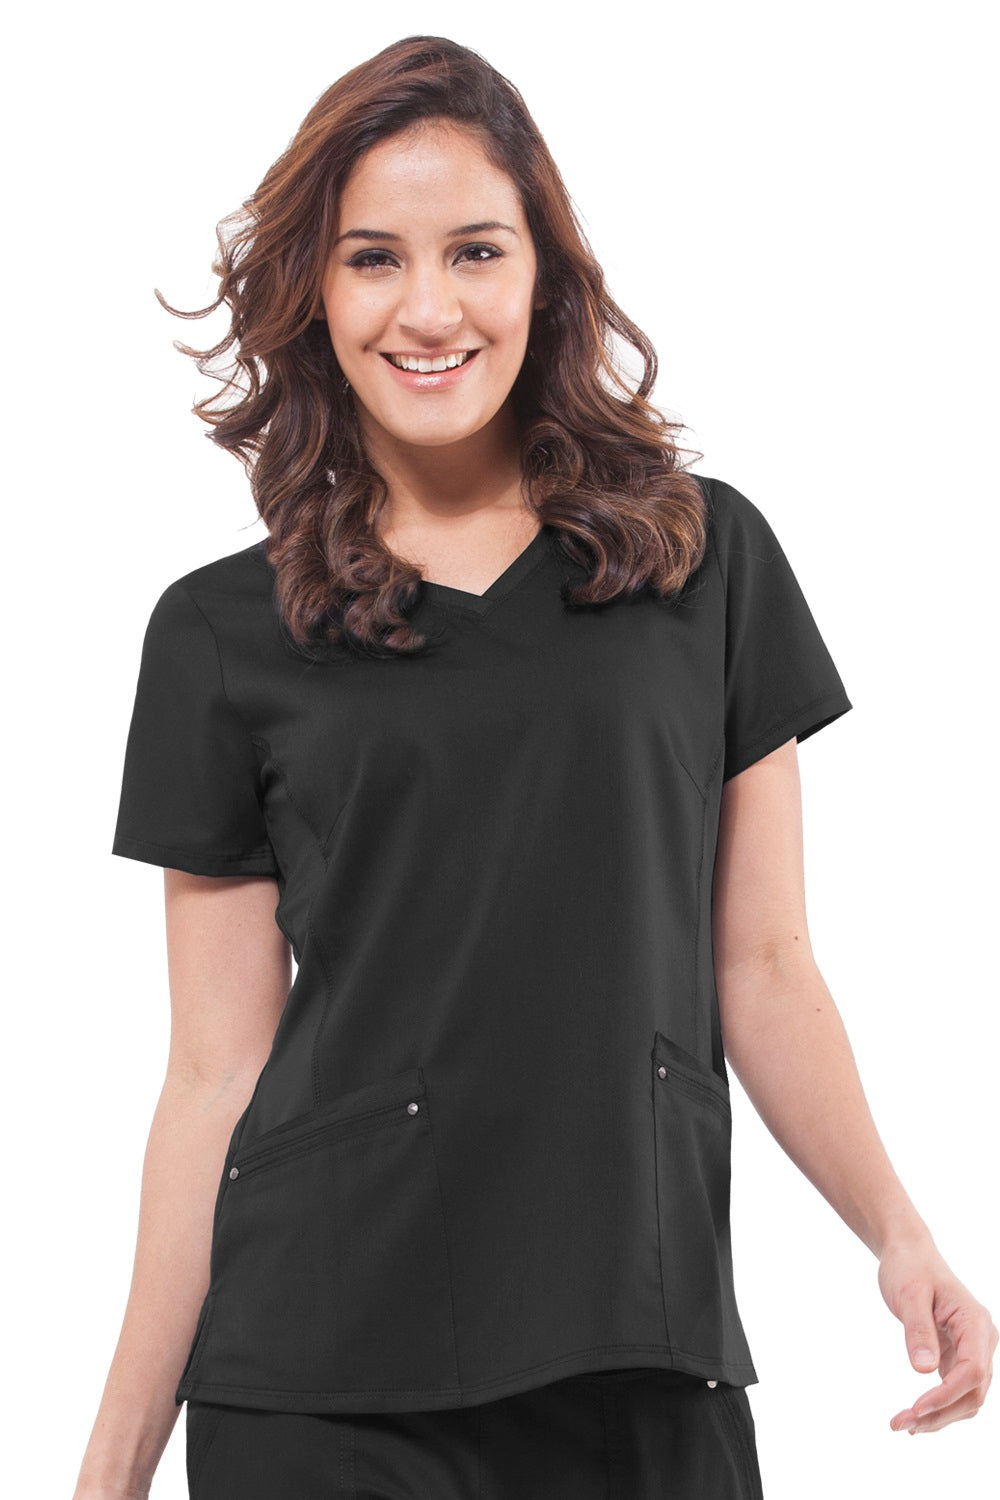 Healing Hands Purple Label Juliet Scrub Top in Black at Parker's Clothing and Shoes.